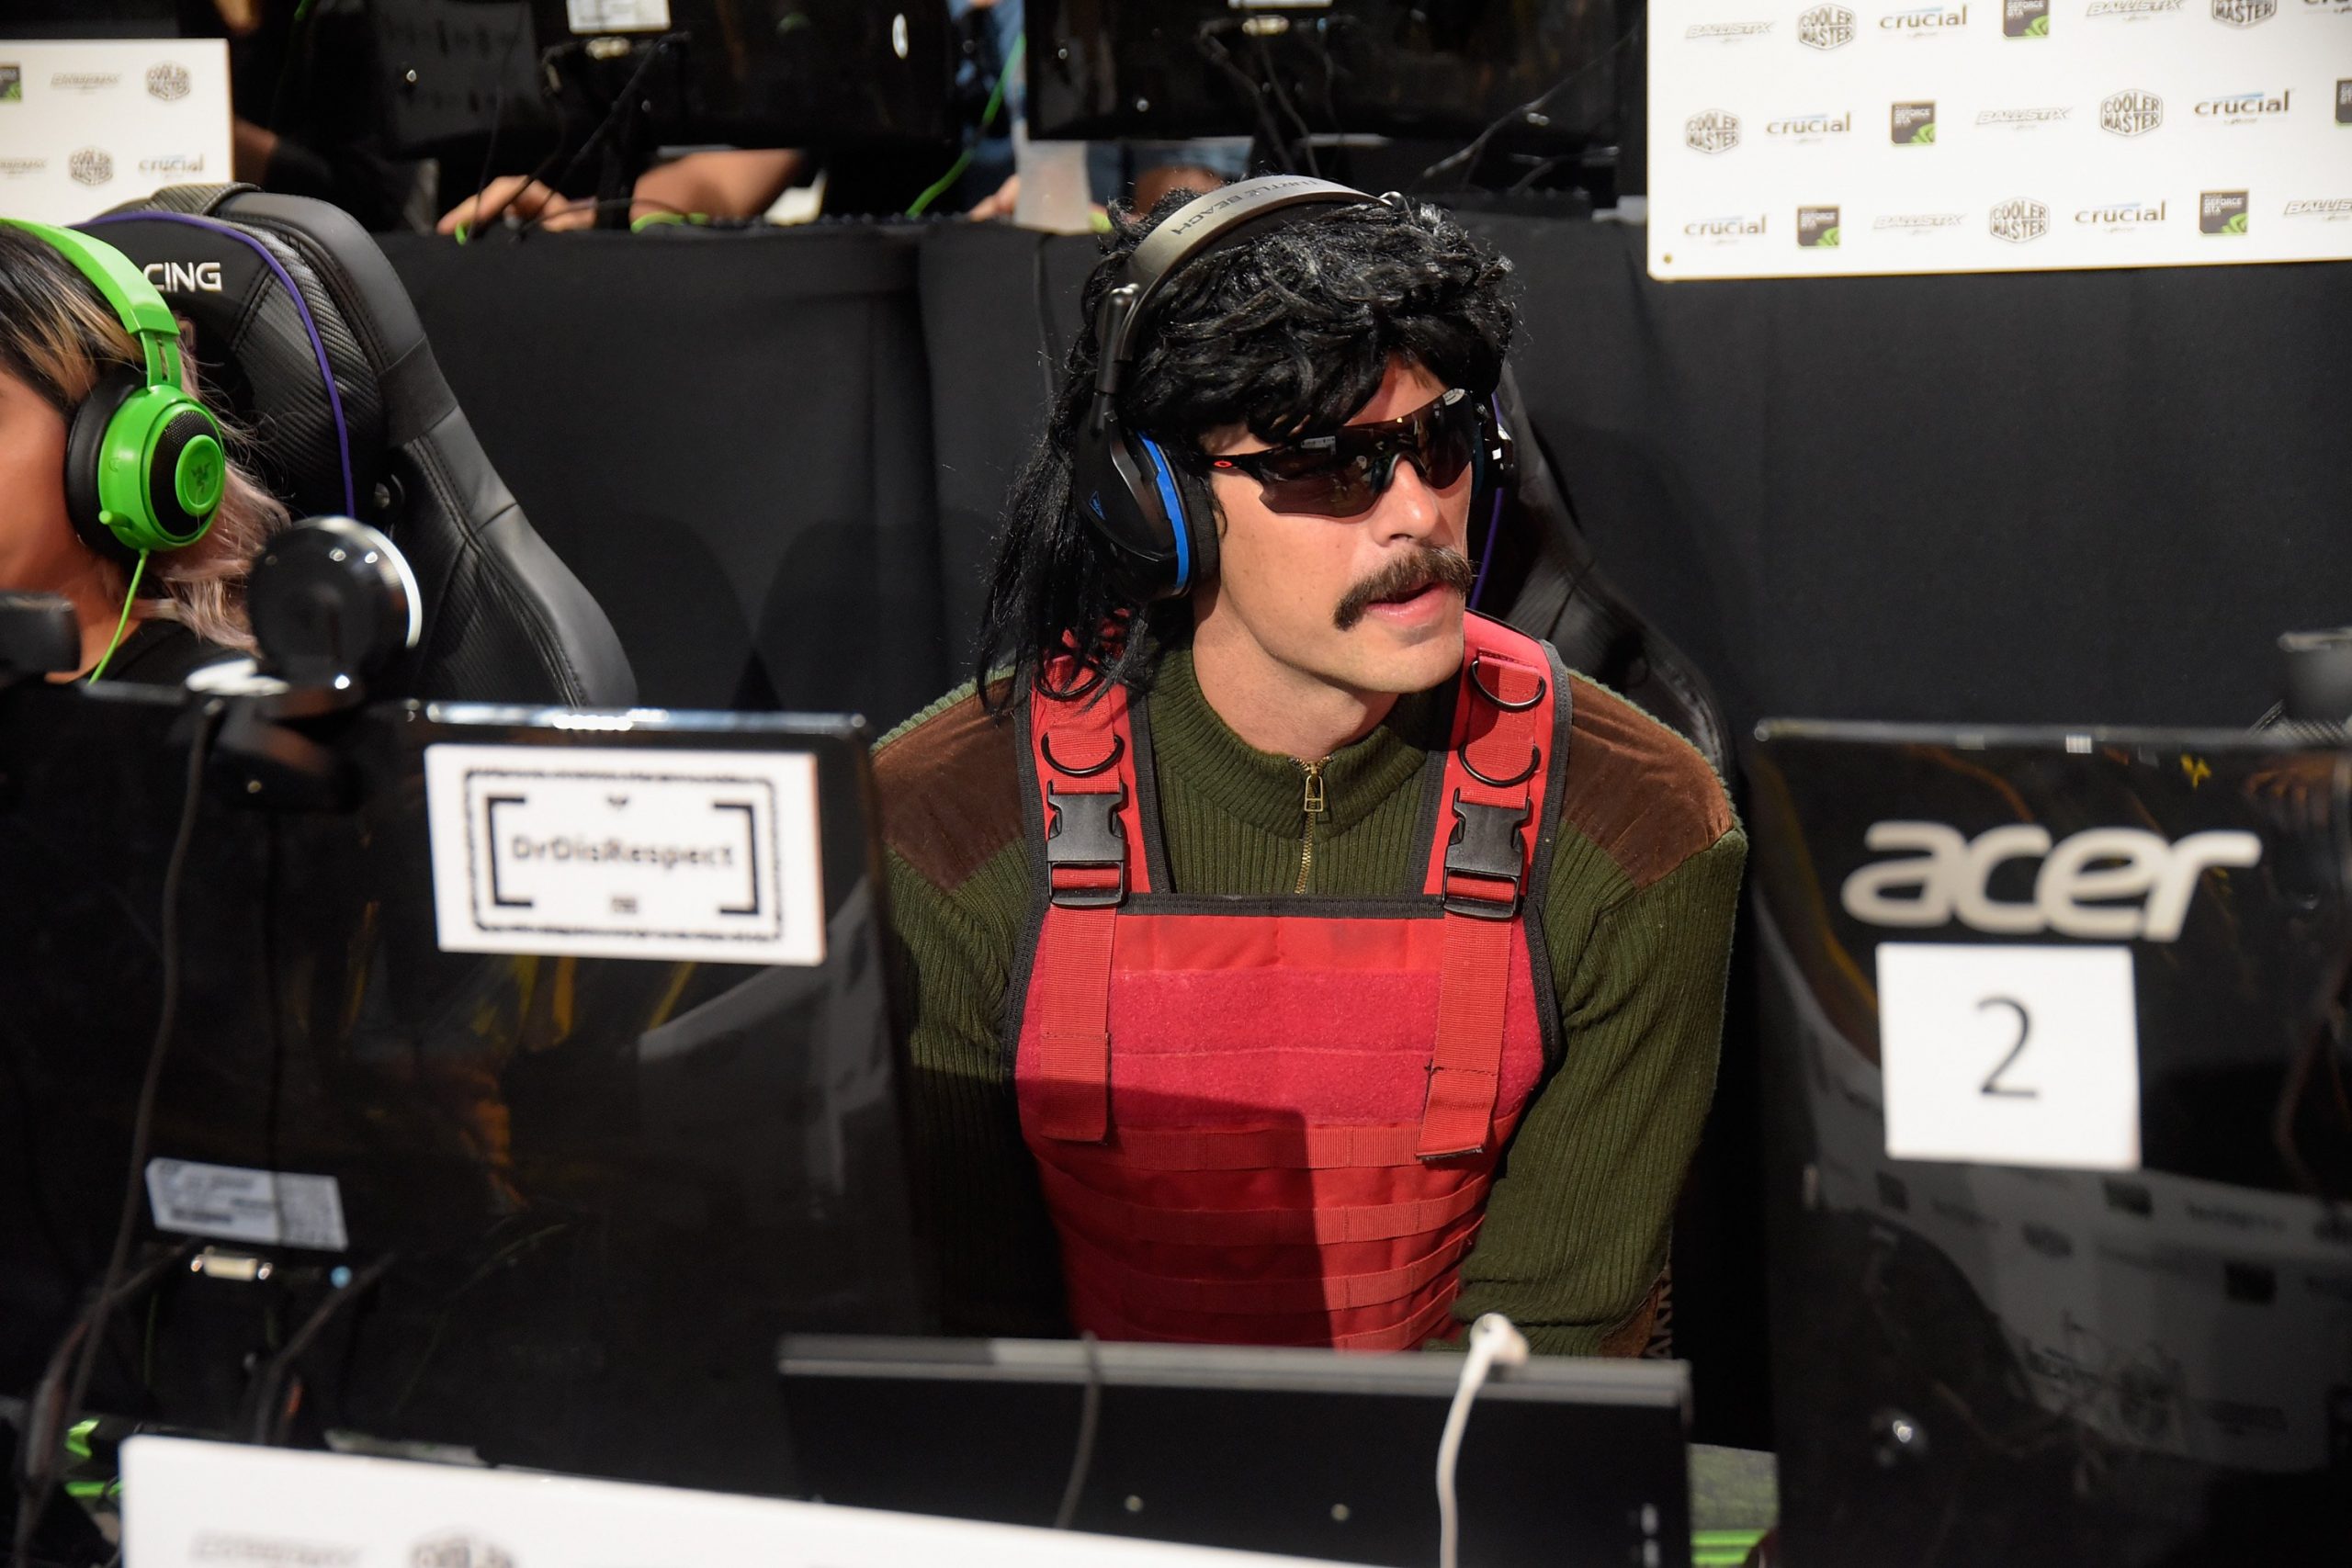 Dr Disrespect unveiled game footage for his new shooter. It did not go well